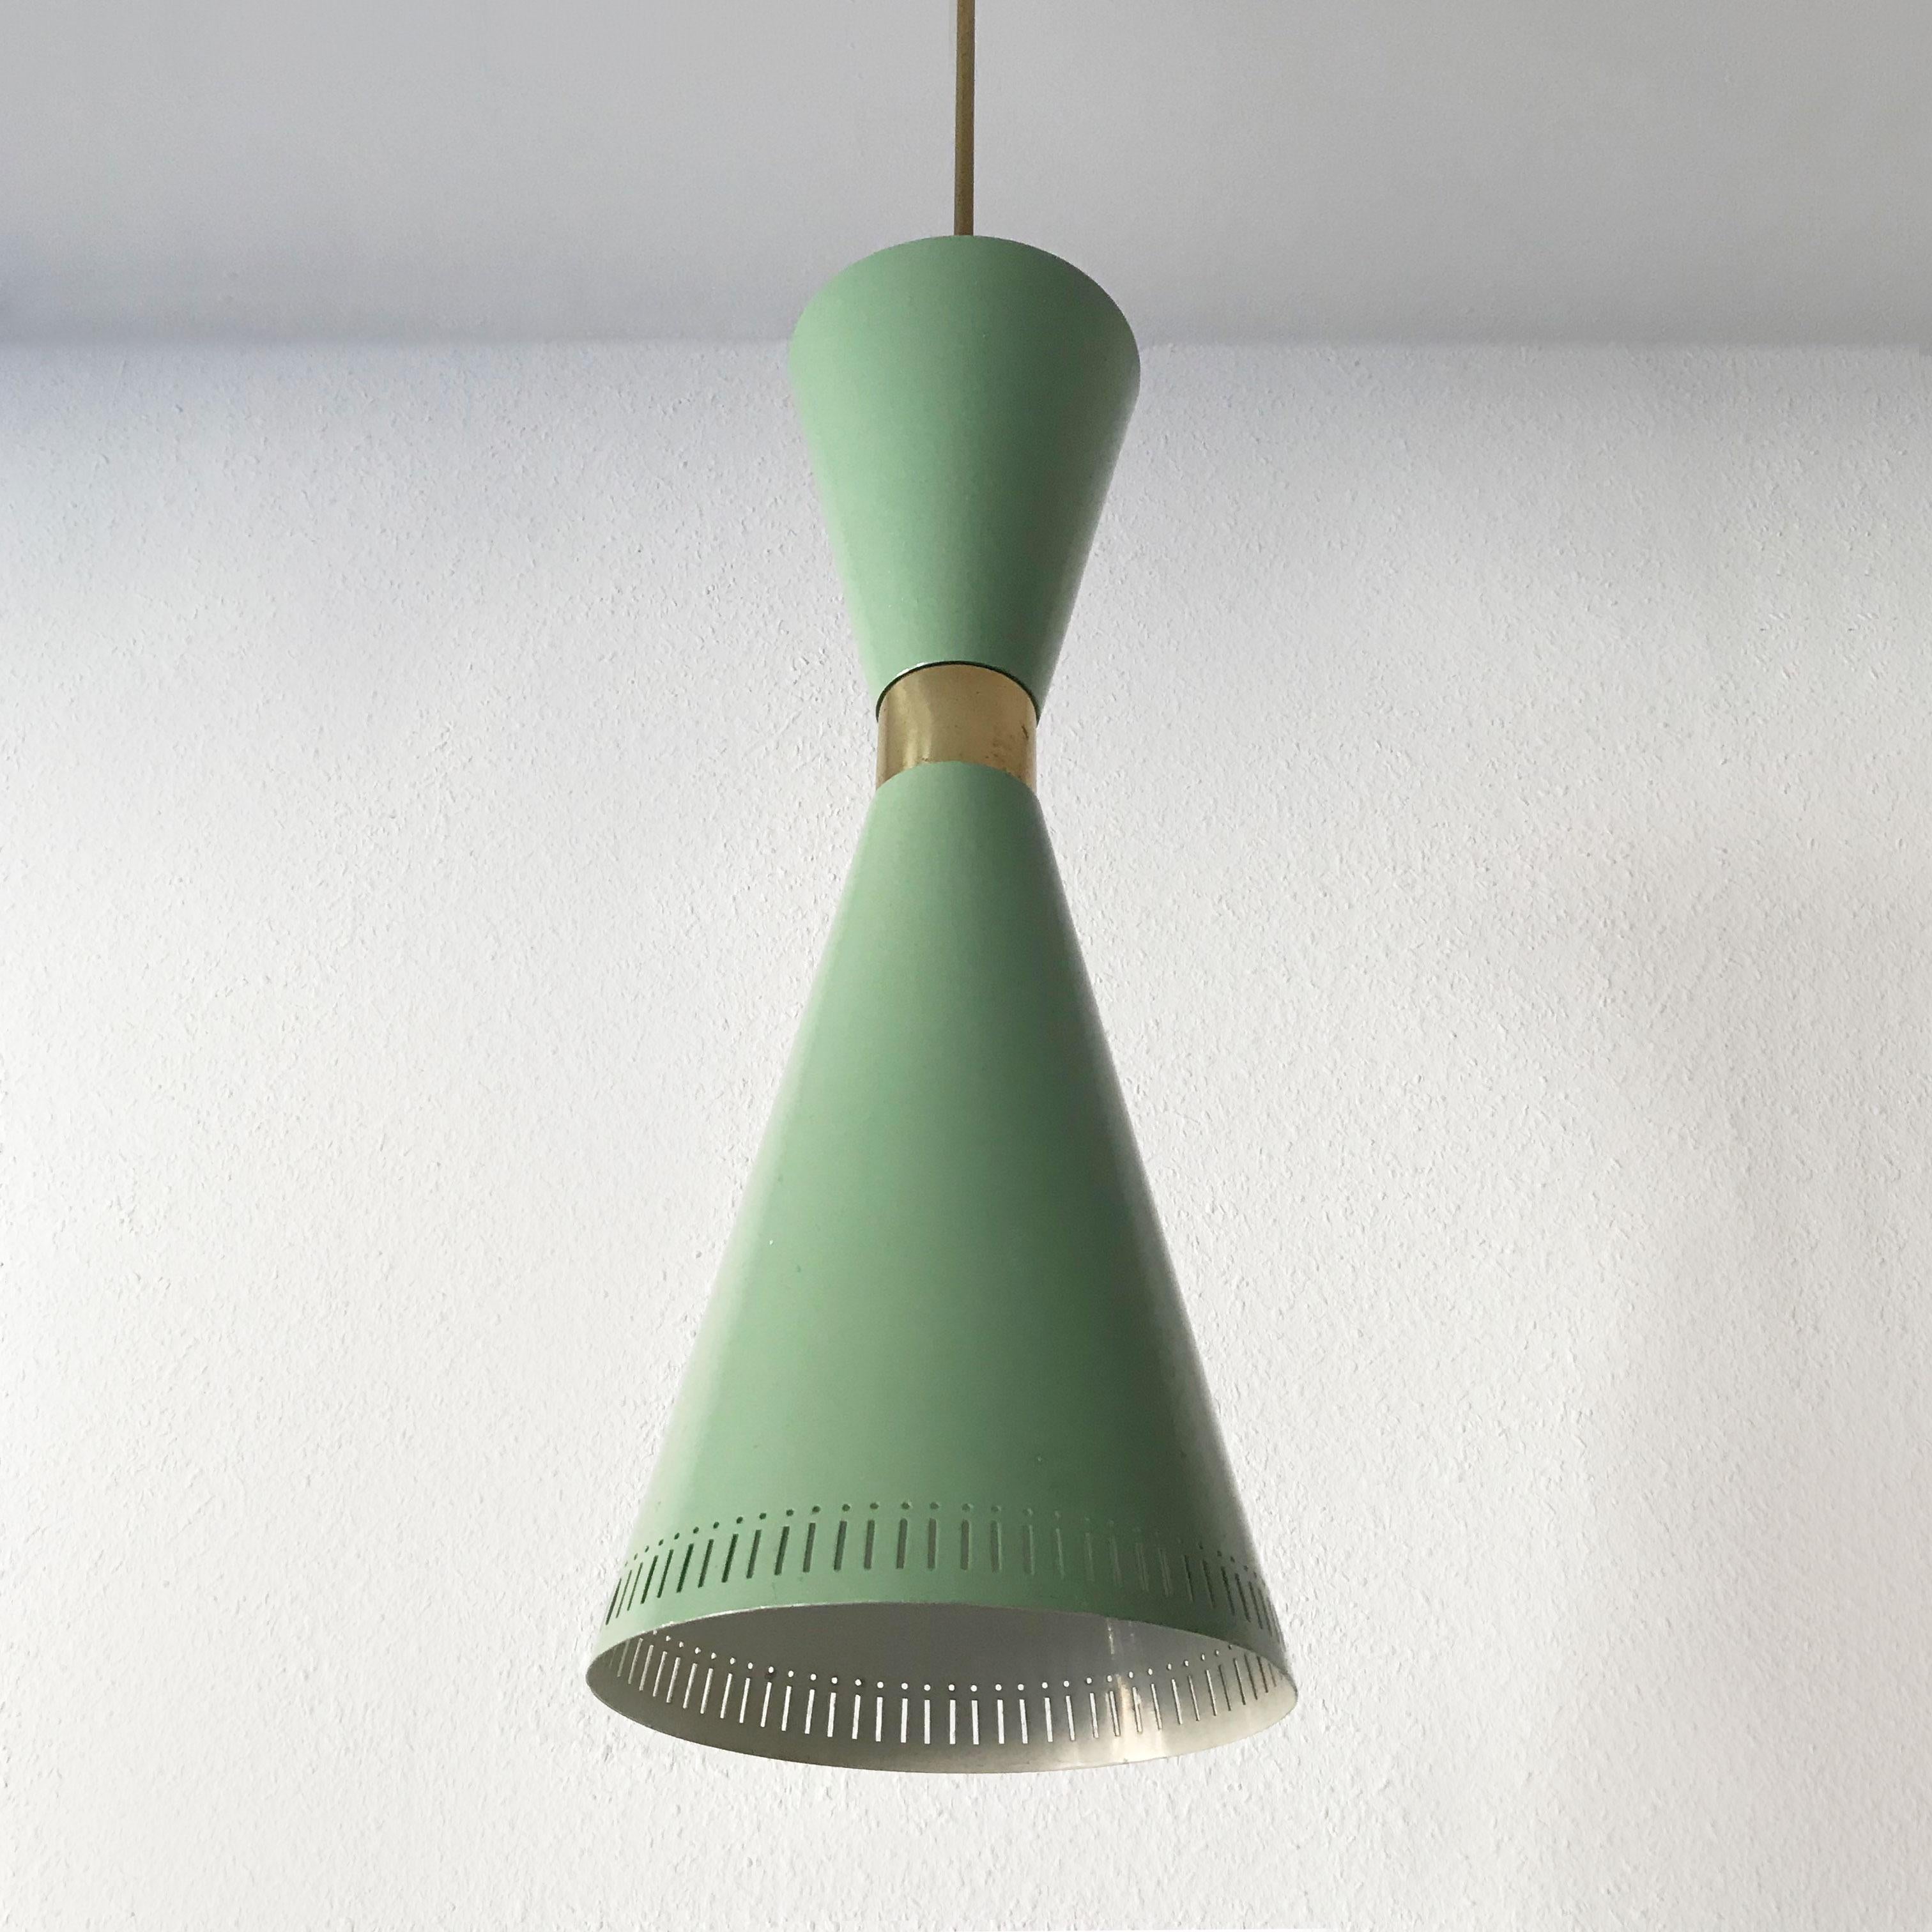 Exceptional Mid-Century Modern Large Diabolo Pendant Lamp by BAG Turgi, 1950s 4